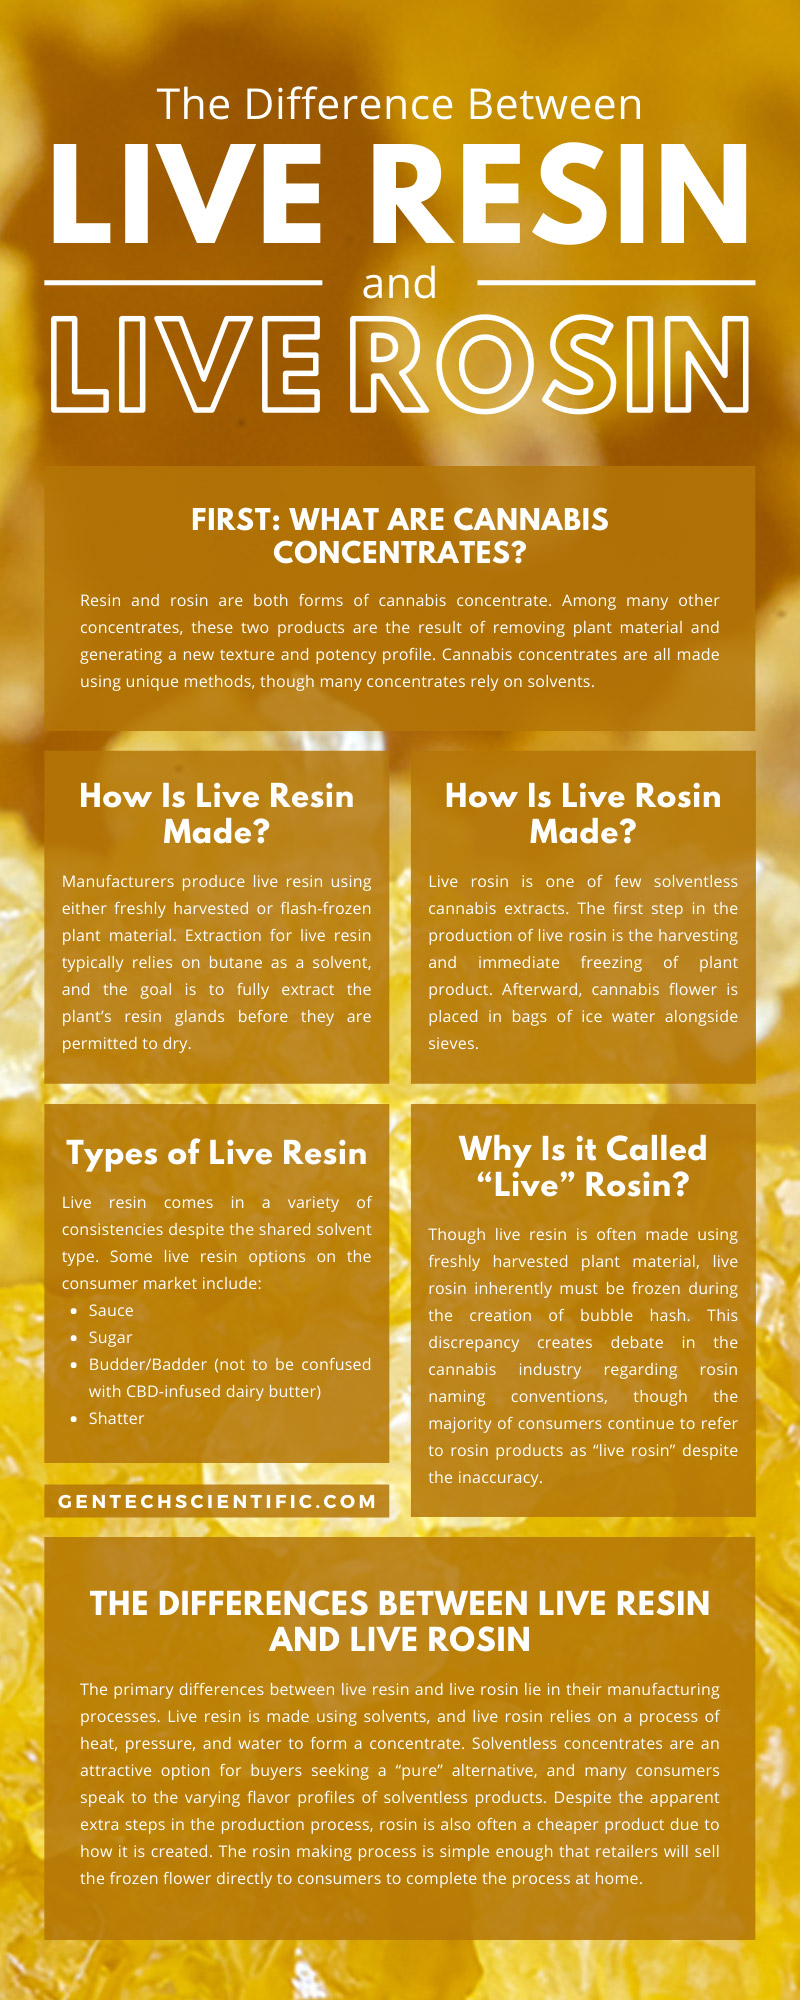 The Difference Between Live Resin and Live Rosin